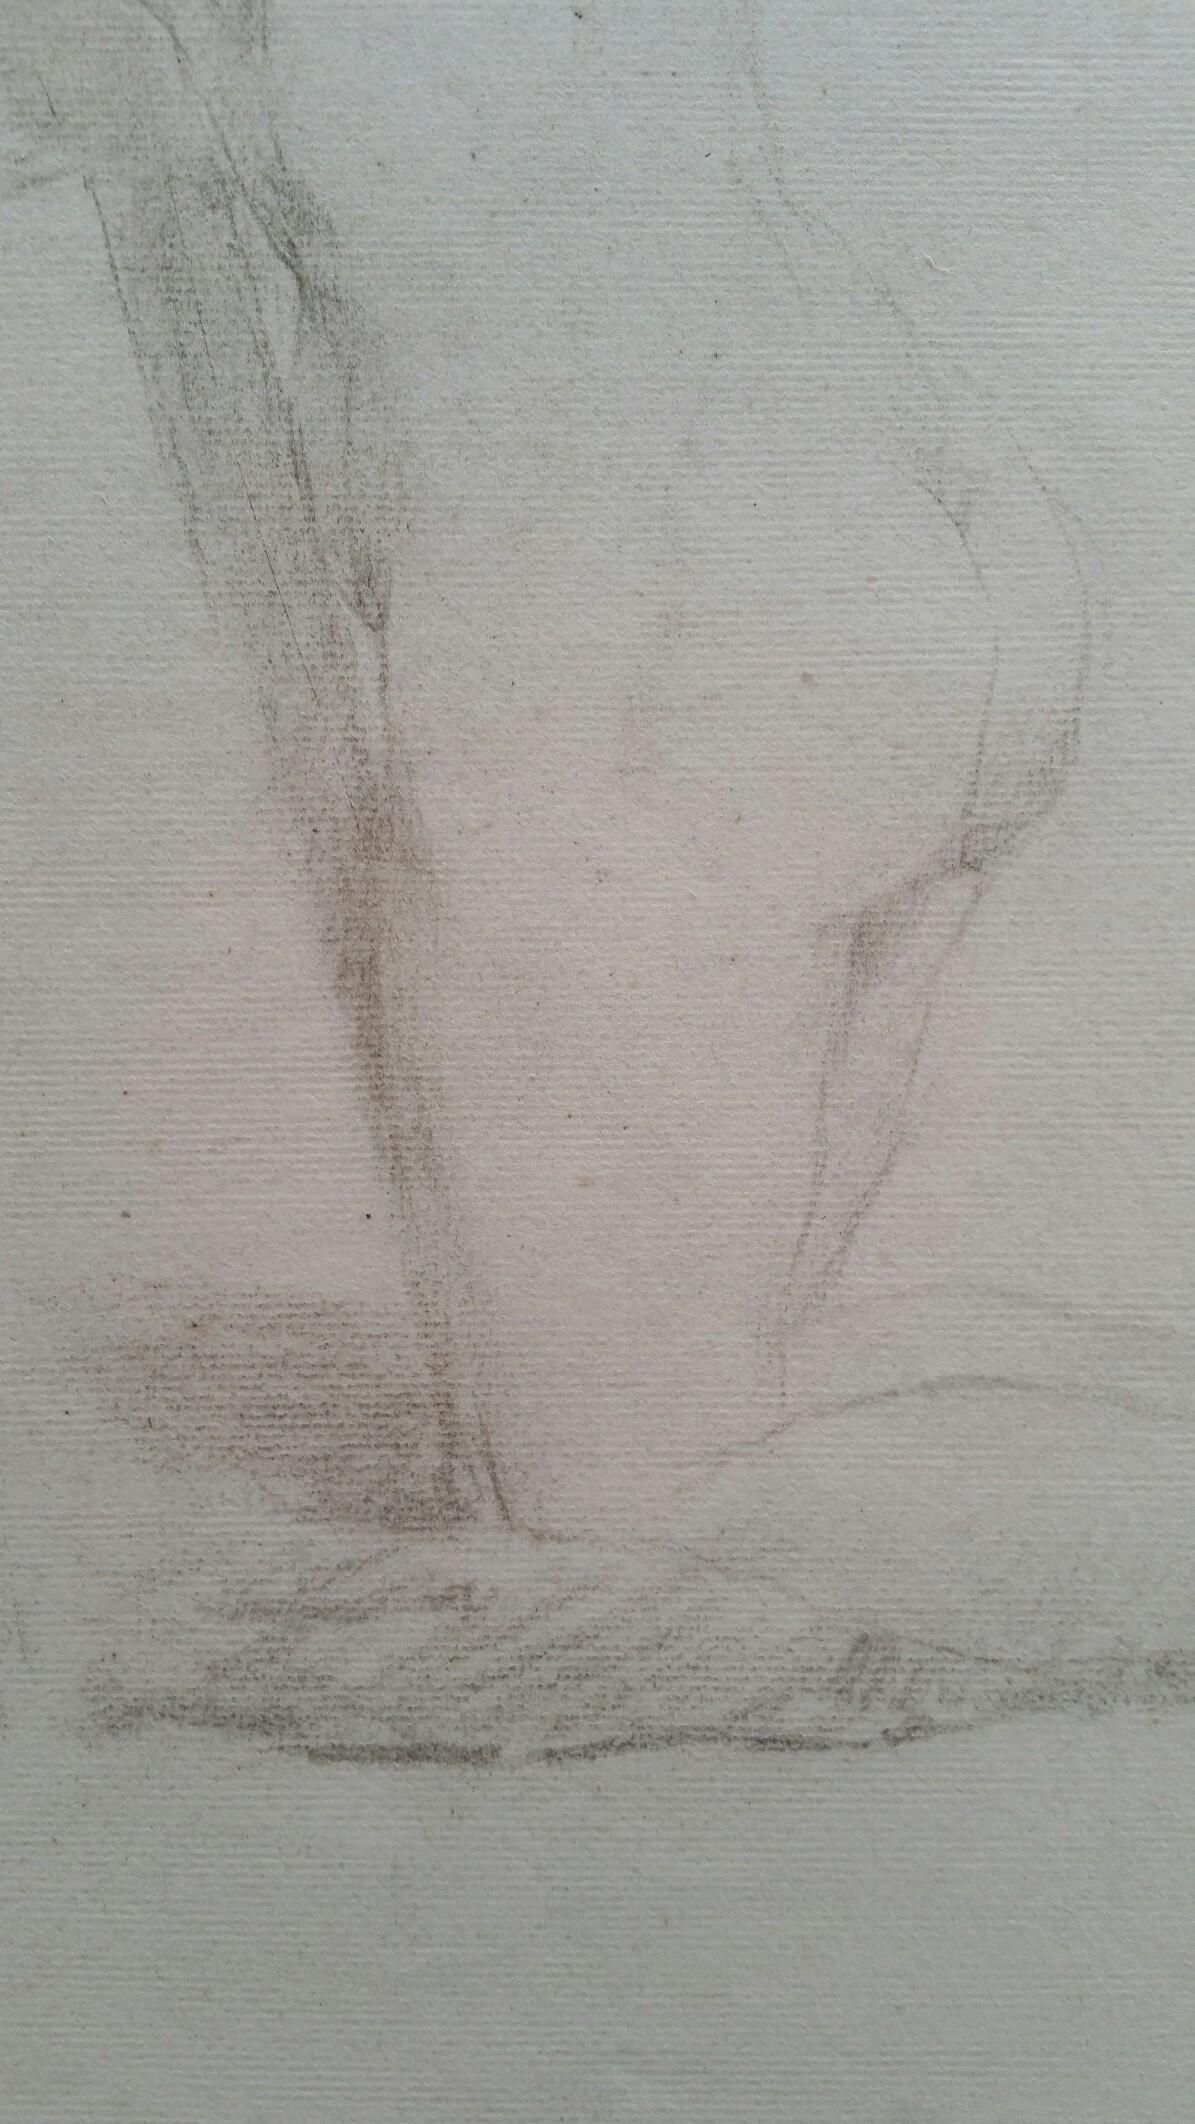 English Graphite Portrait Sketch of Female Nude, Kneeling In Good Condition For Sale In Cirencester, GB